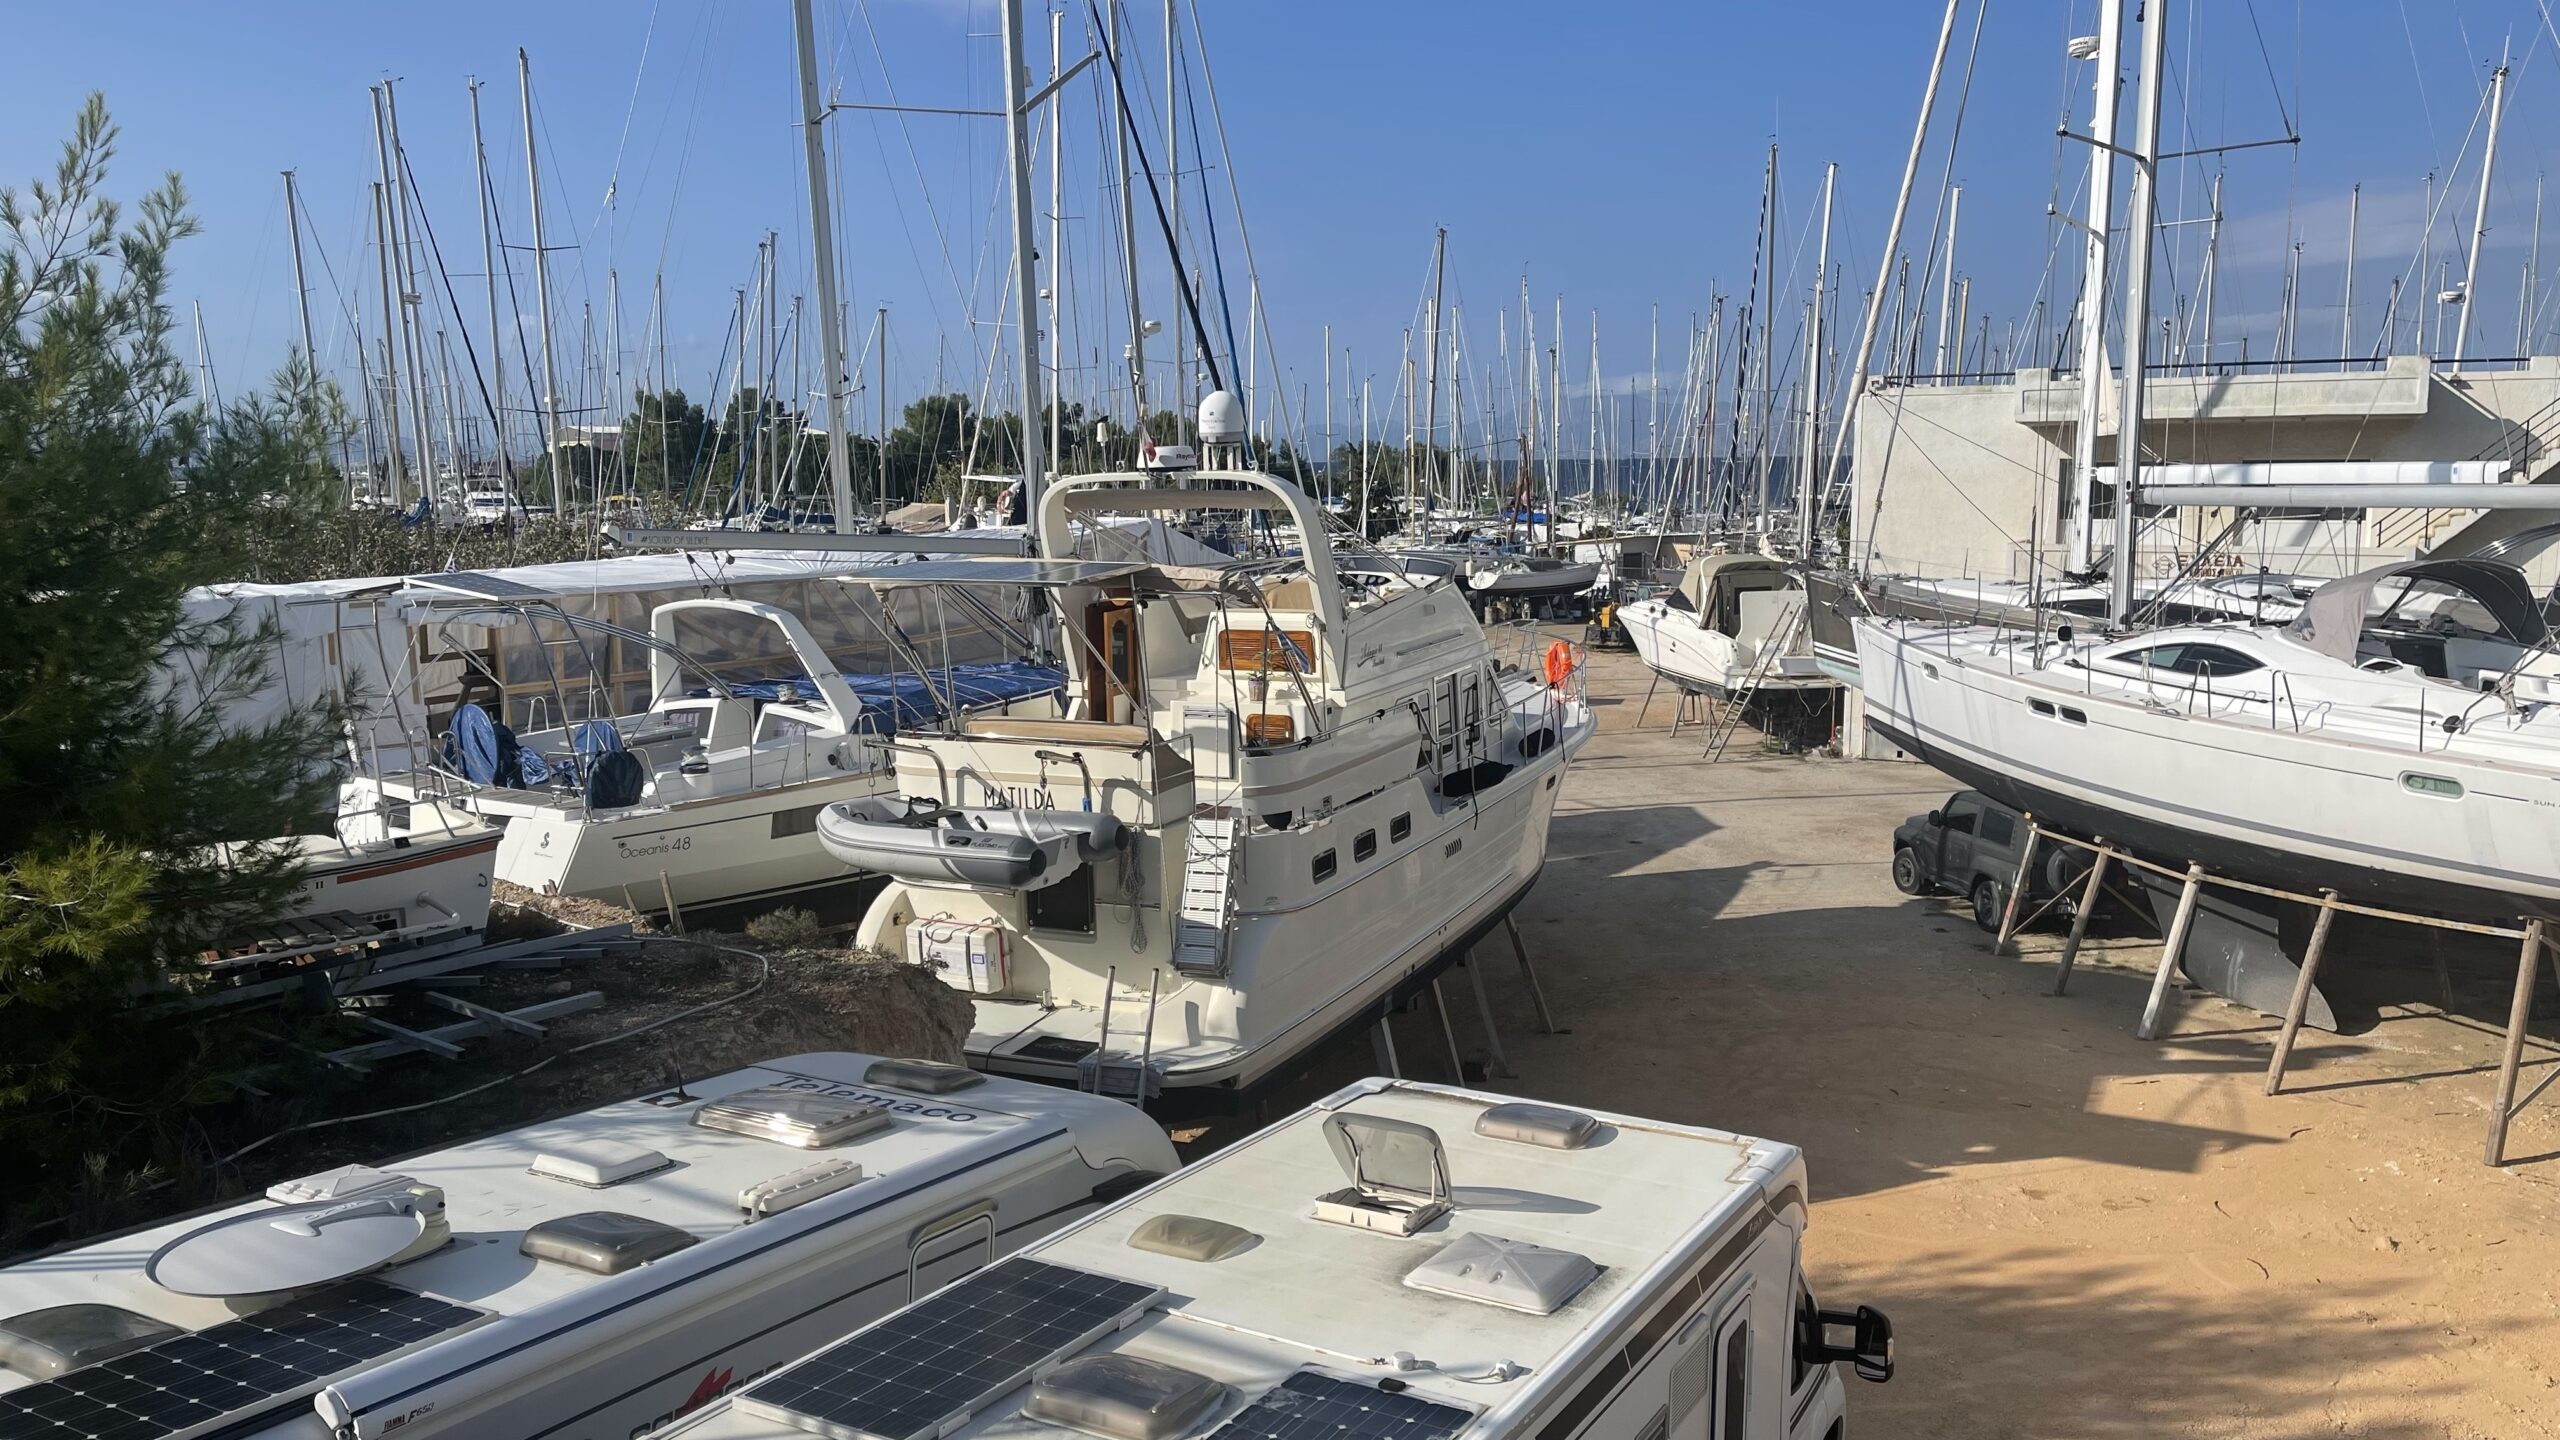 The trials and tribulations of buying our first boat using an MYBA contract in the Mediterranean